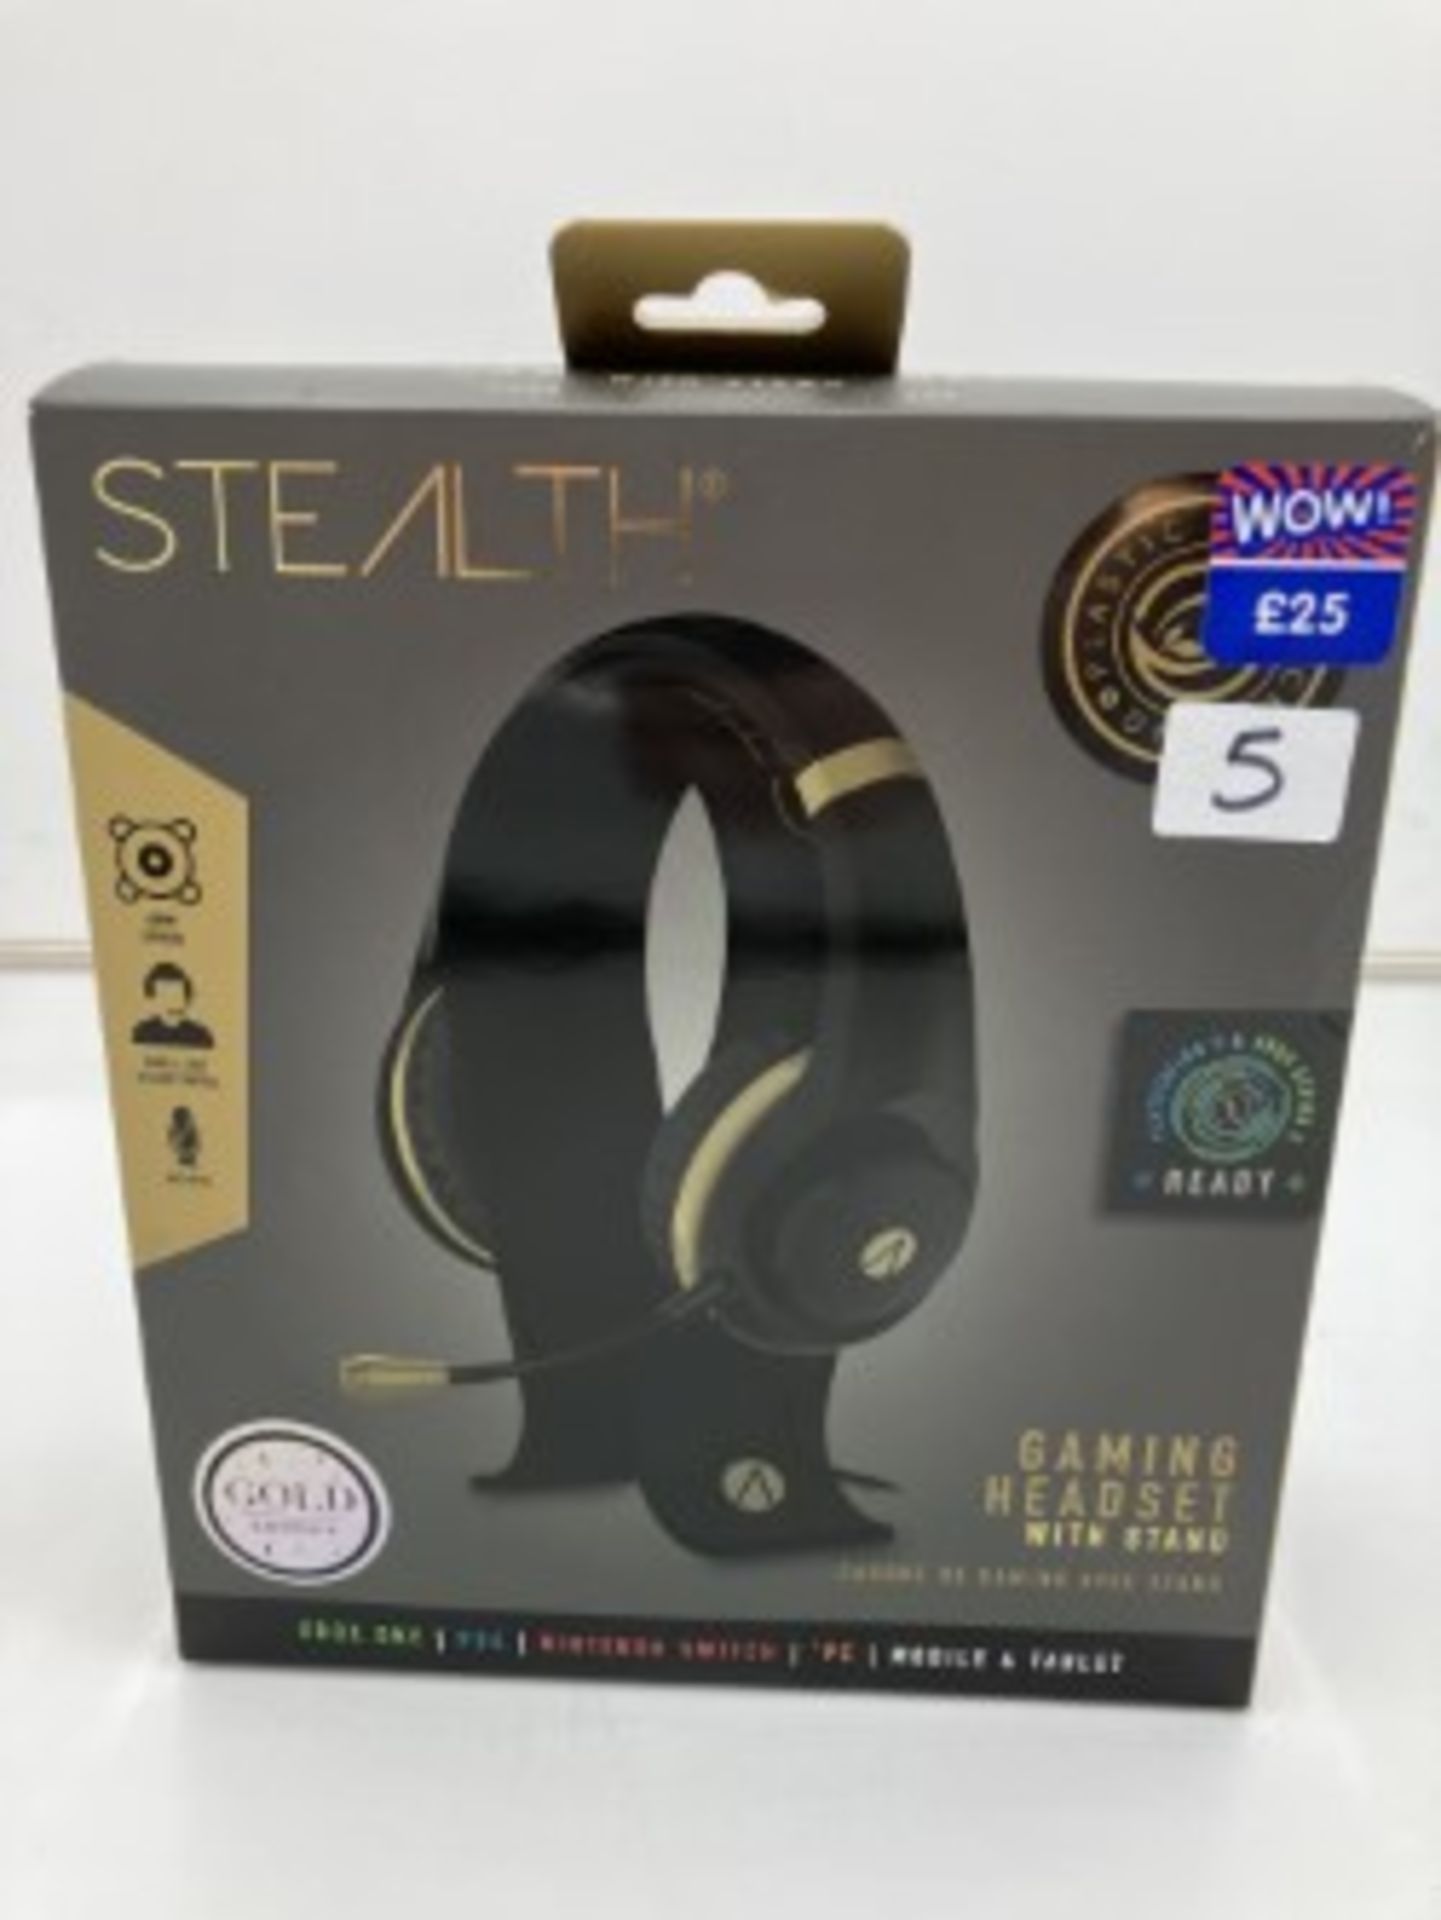 STEALTH GAMING HEADSET - GOLD EDITION - 9723 - Image 3 of 3